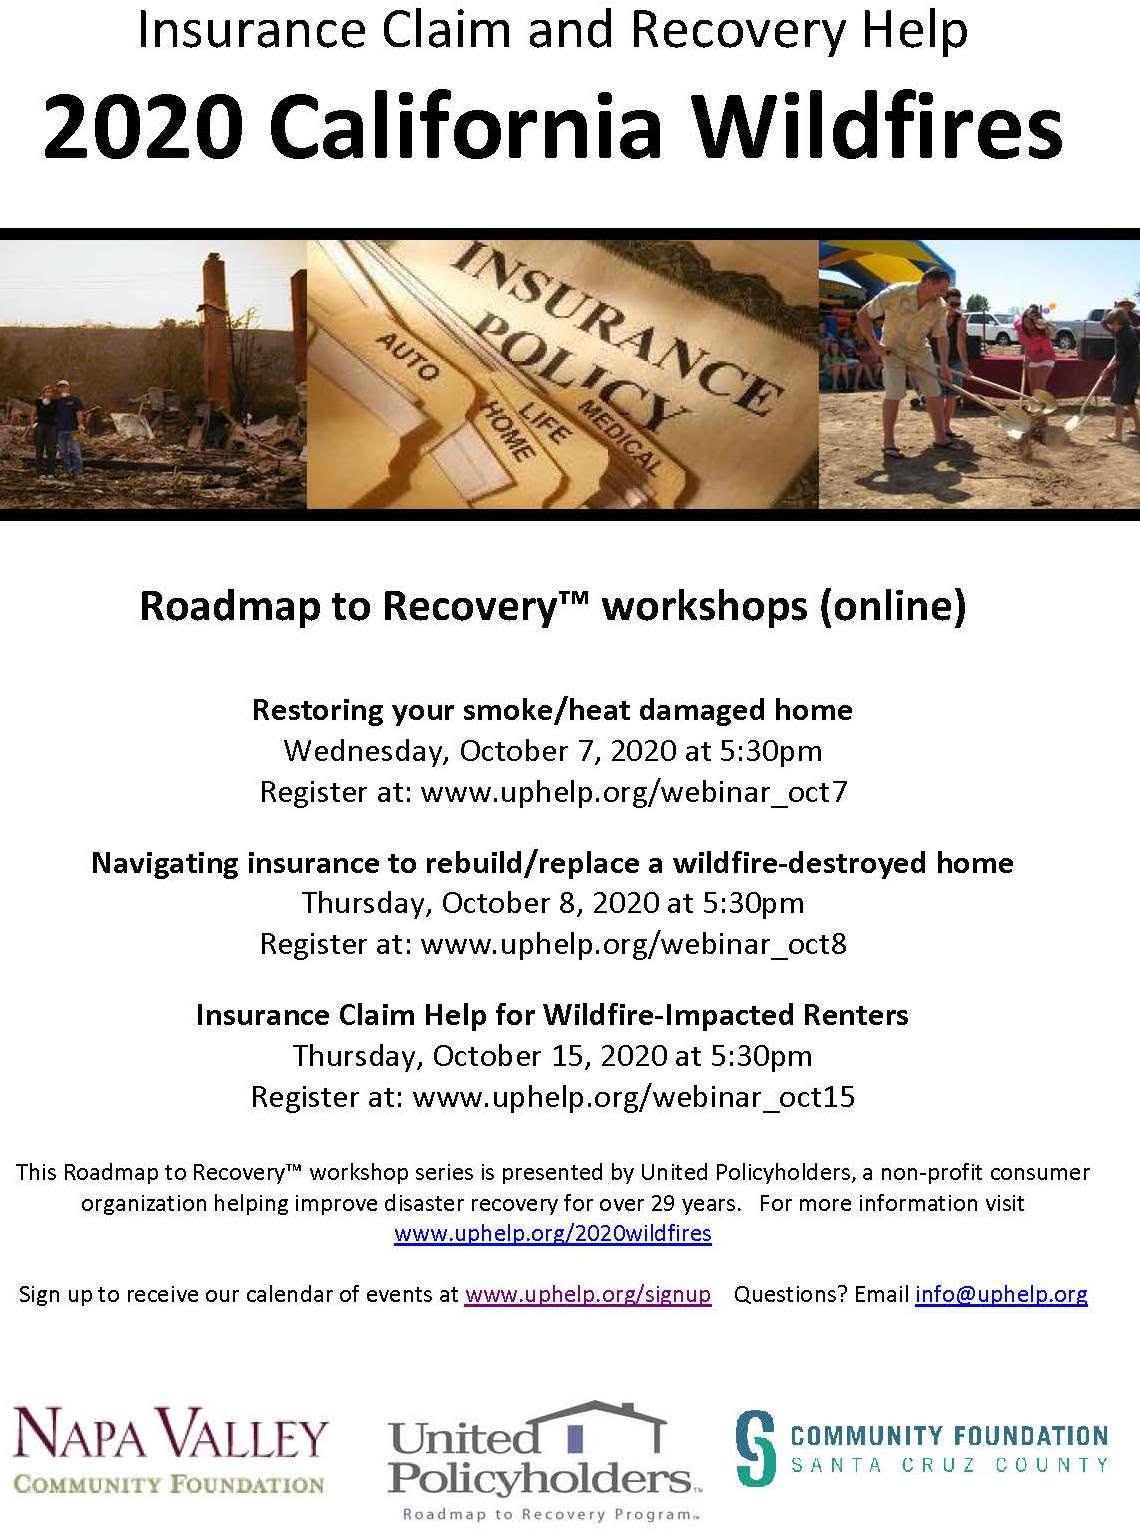 Roadmap to Recovery workshop; for mer info visit www.uhelp.org/2020wildfires